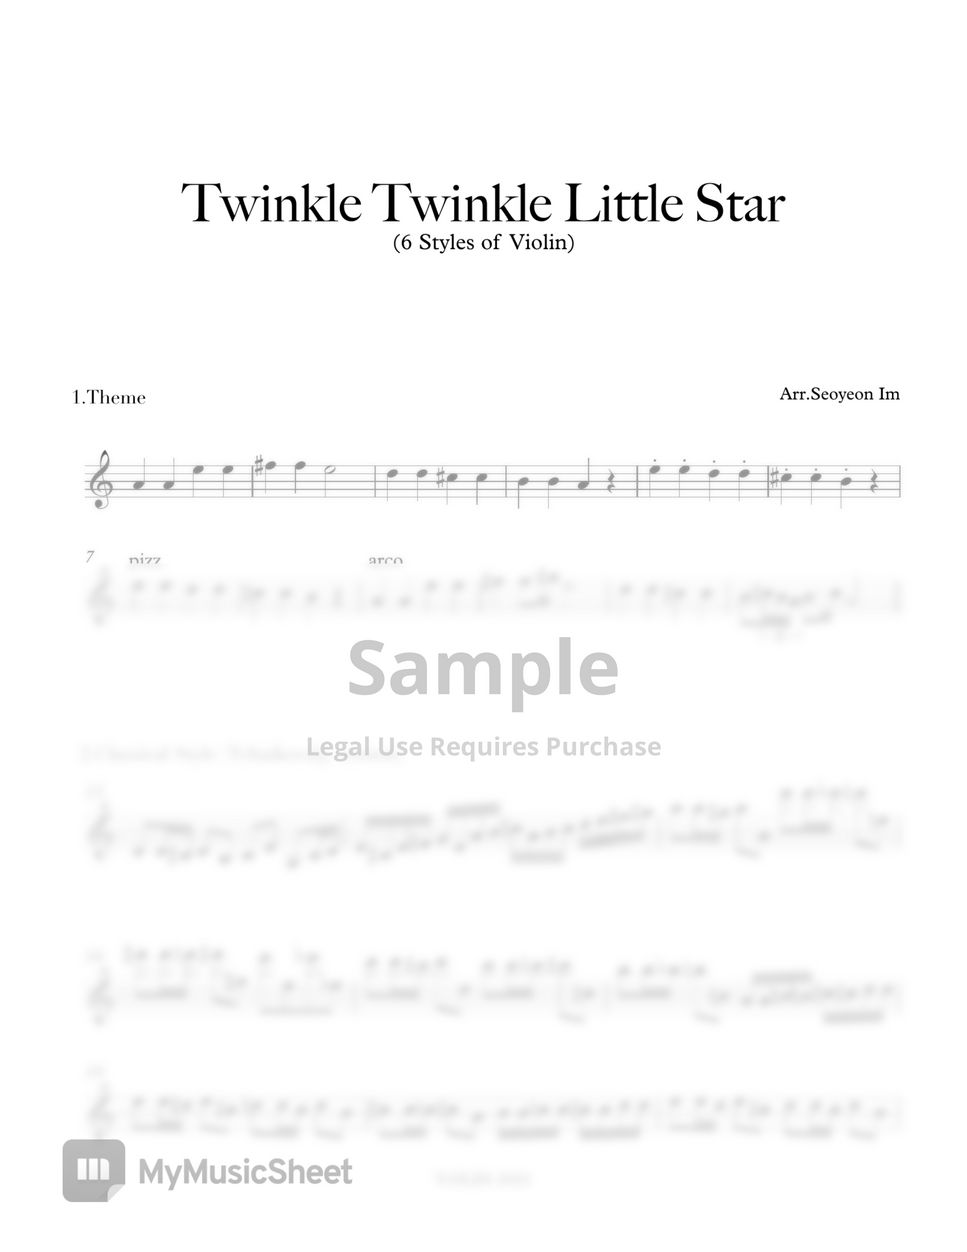 Mozart - 6 Different Style of "Twinkle Twinkle Little Star" by V.OLIN